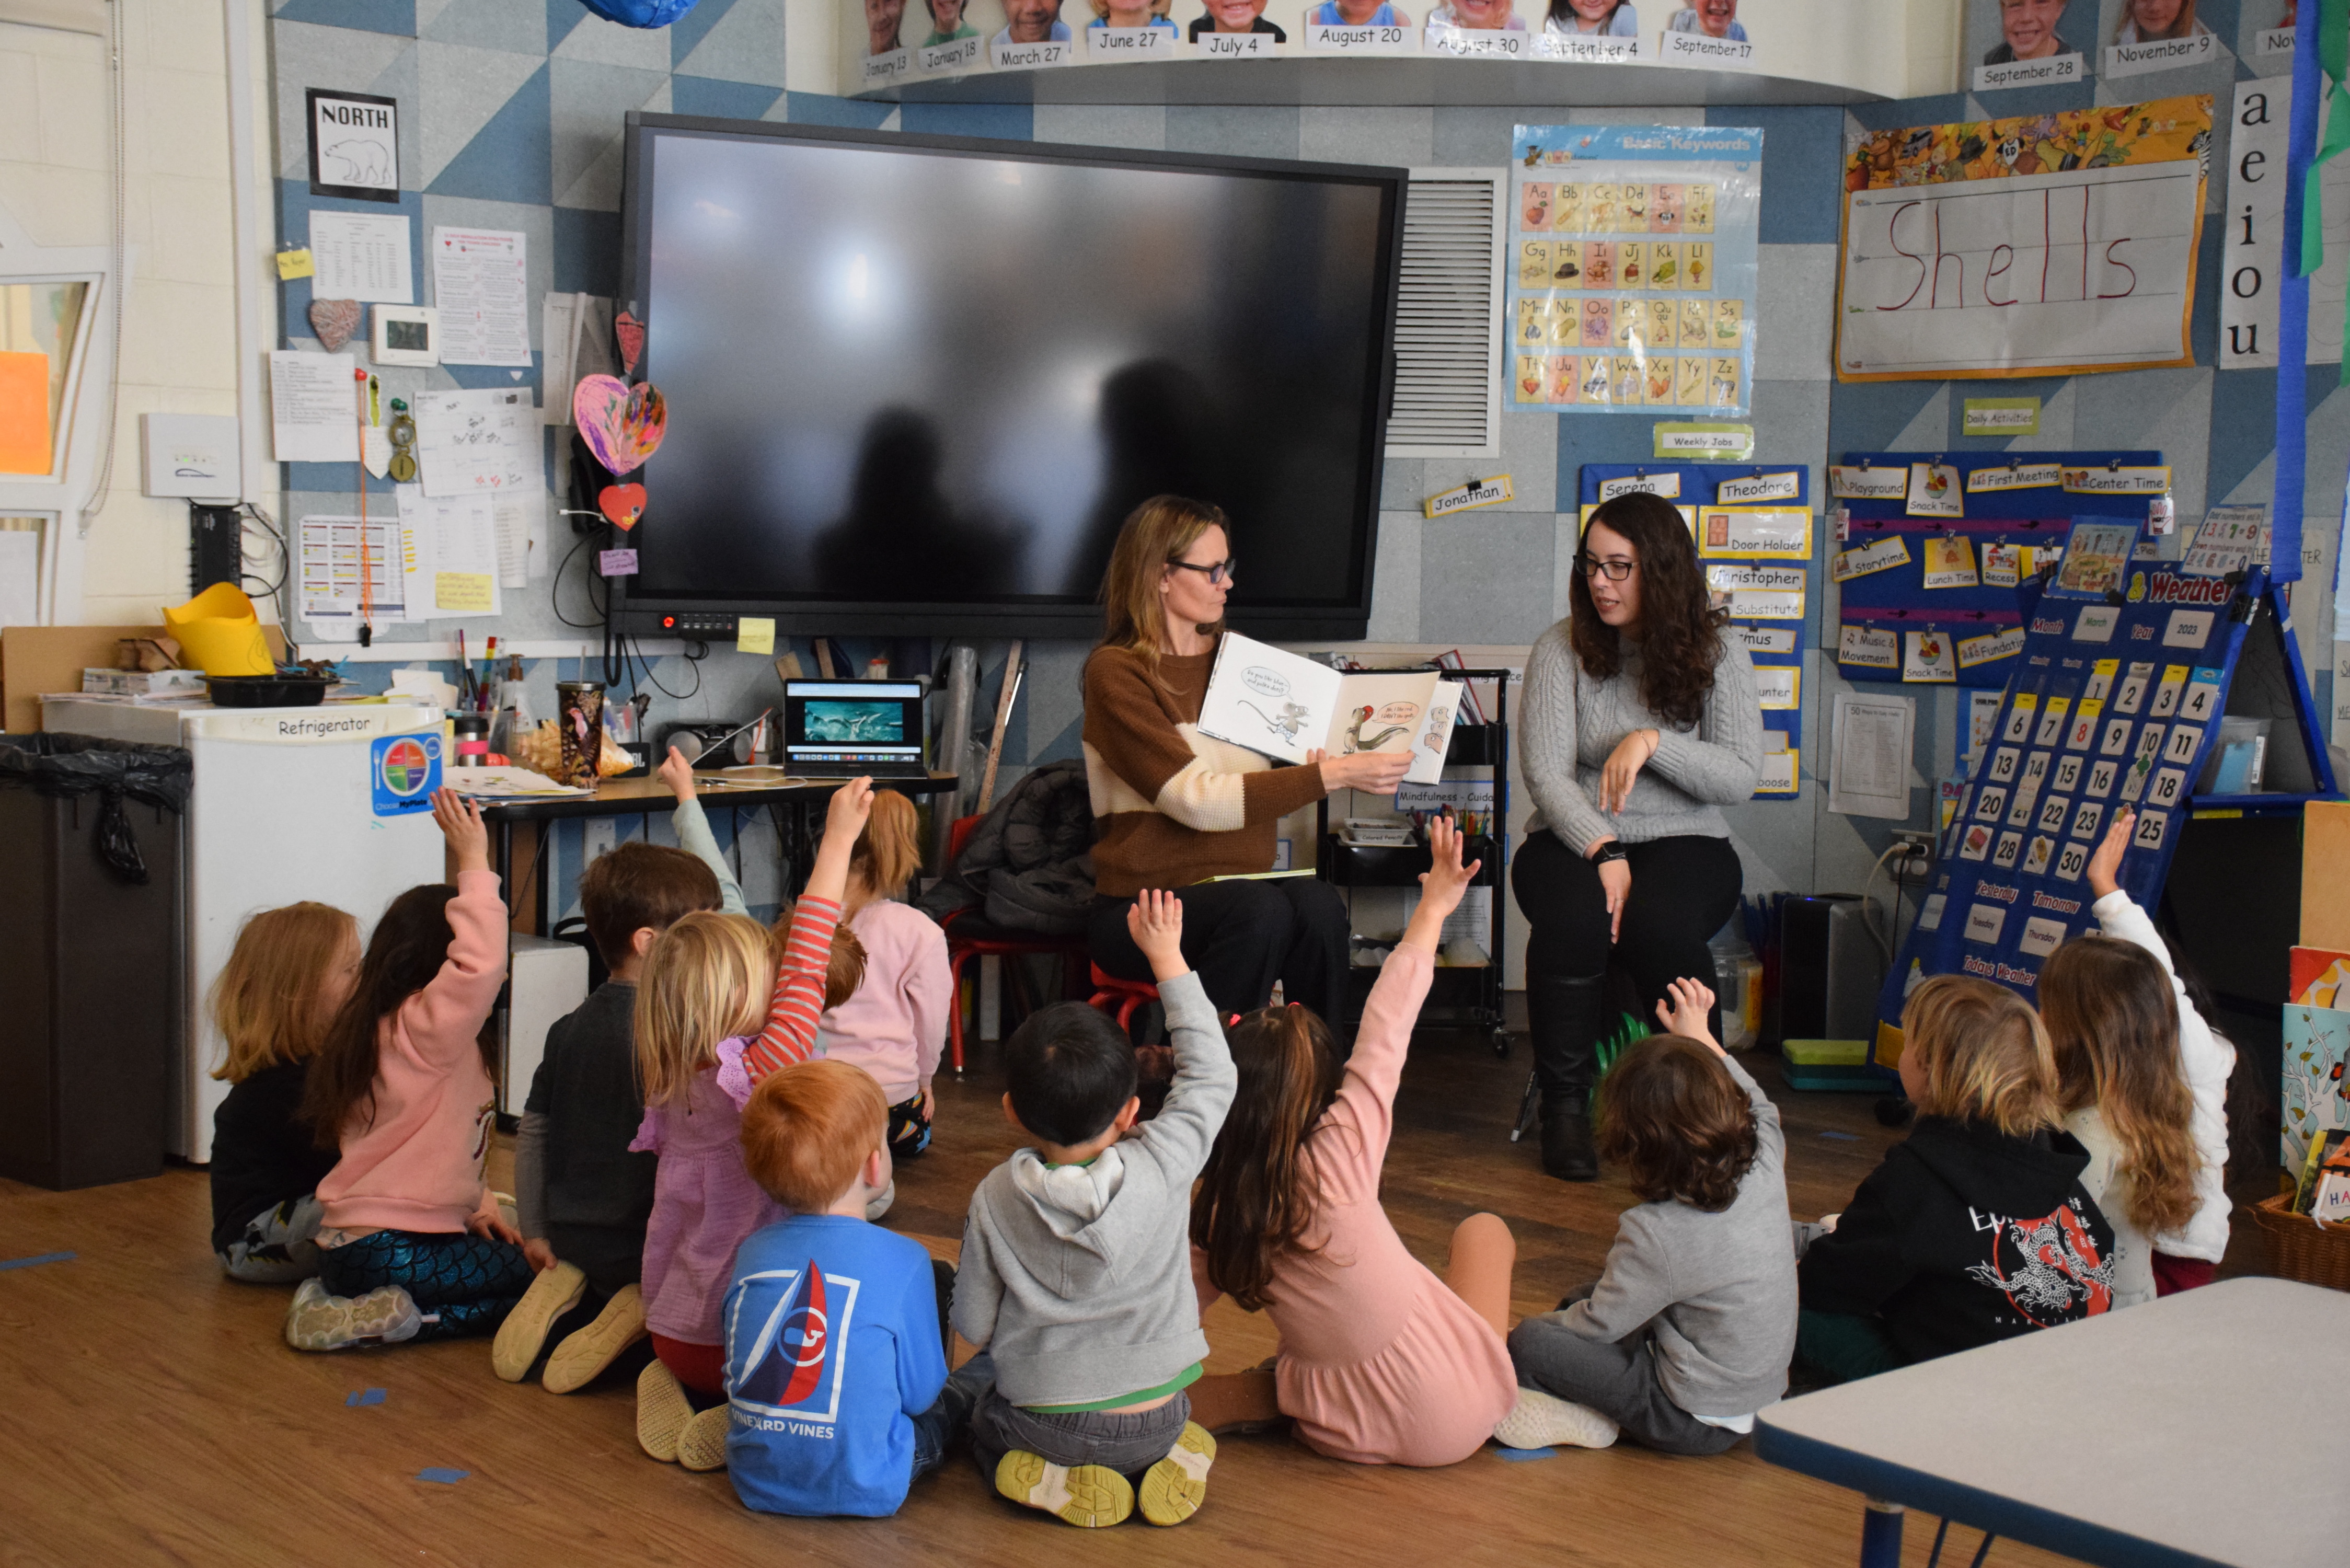 Ginta Genender, the children's librarian at John Jermain Memorial Library, recently visited the pre-K classroom of Mindy Reyer at Sag Harbor Elementary School. Genender read Bethanie Deeney Murguia’s book “We Disagree,” a picture book about acceptance and friendship. While reading the book, Genender took time to have the students share their own likes and dislikes and decide whether any of their classmates agreed or not. In turn, students had the opportunity to learn more about their classmates. COURTESY SAG HARBOR SCHOOL DISTRICT